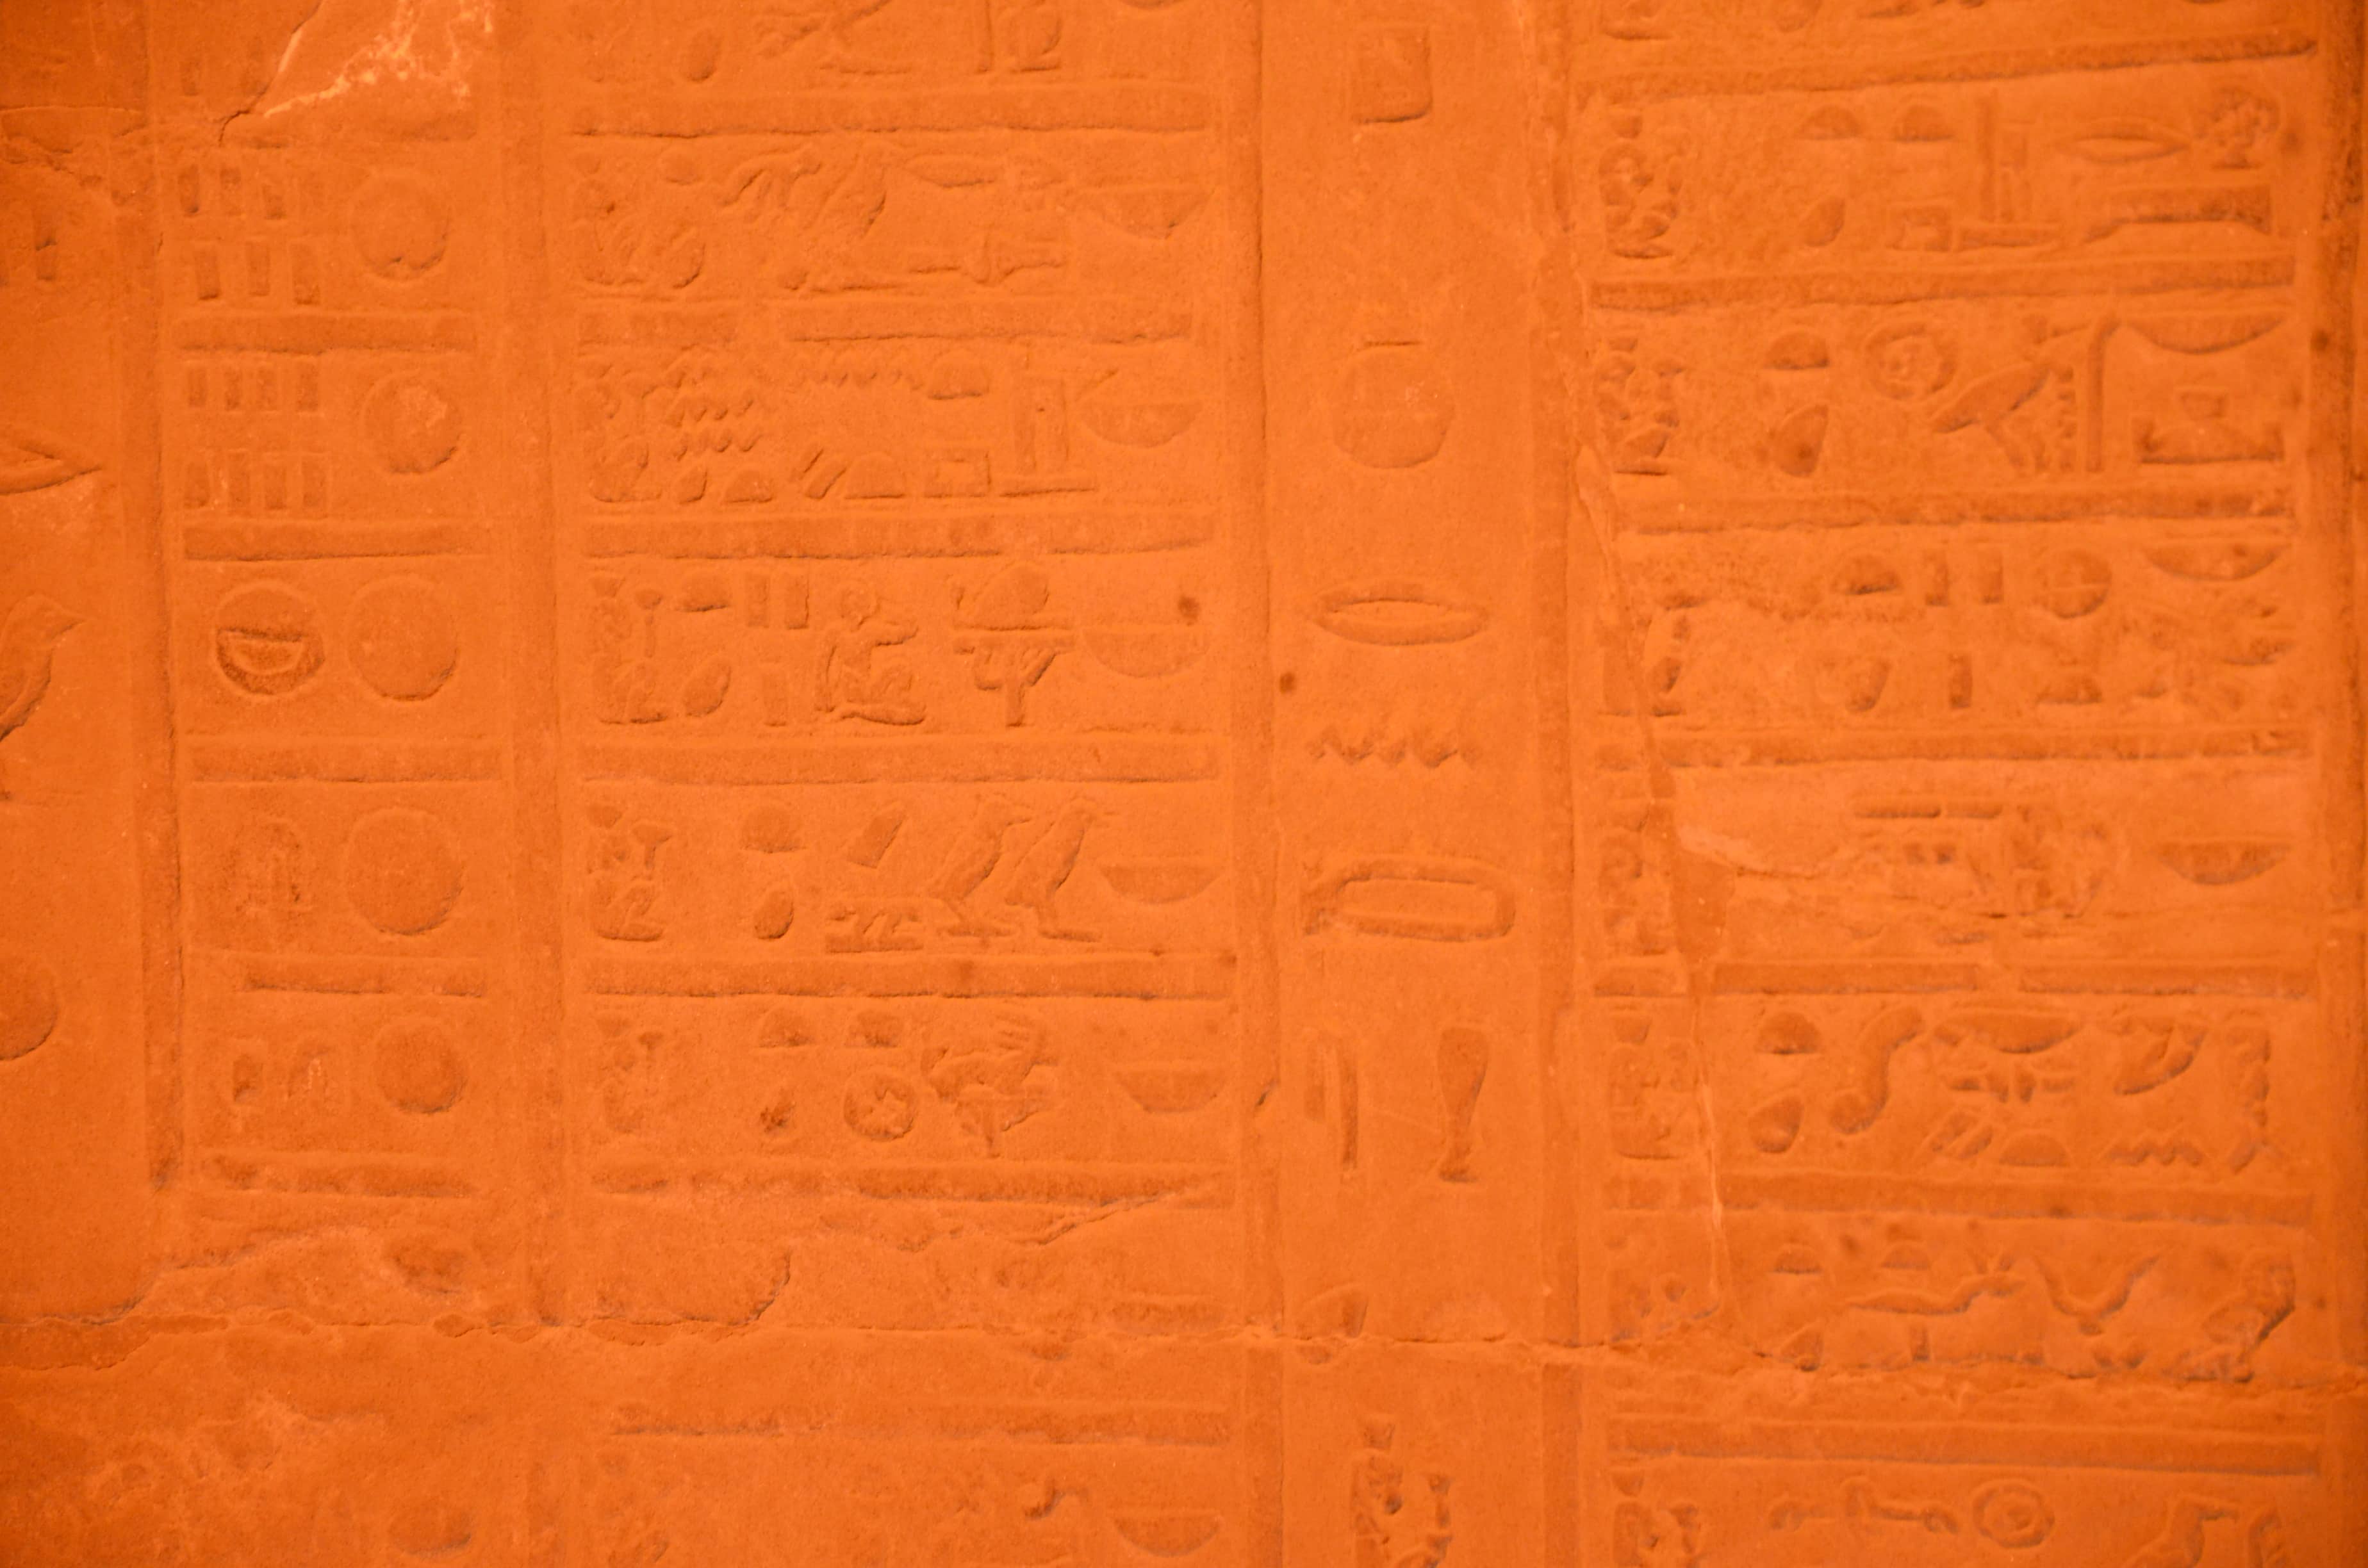 Calendar at the Temple of Kom Ombo, Egypt